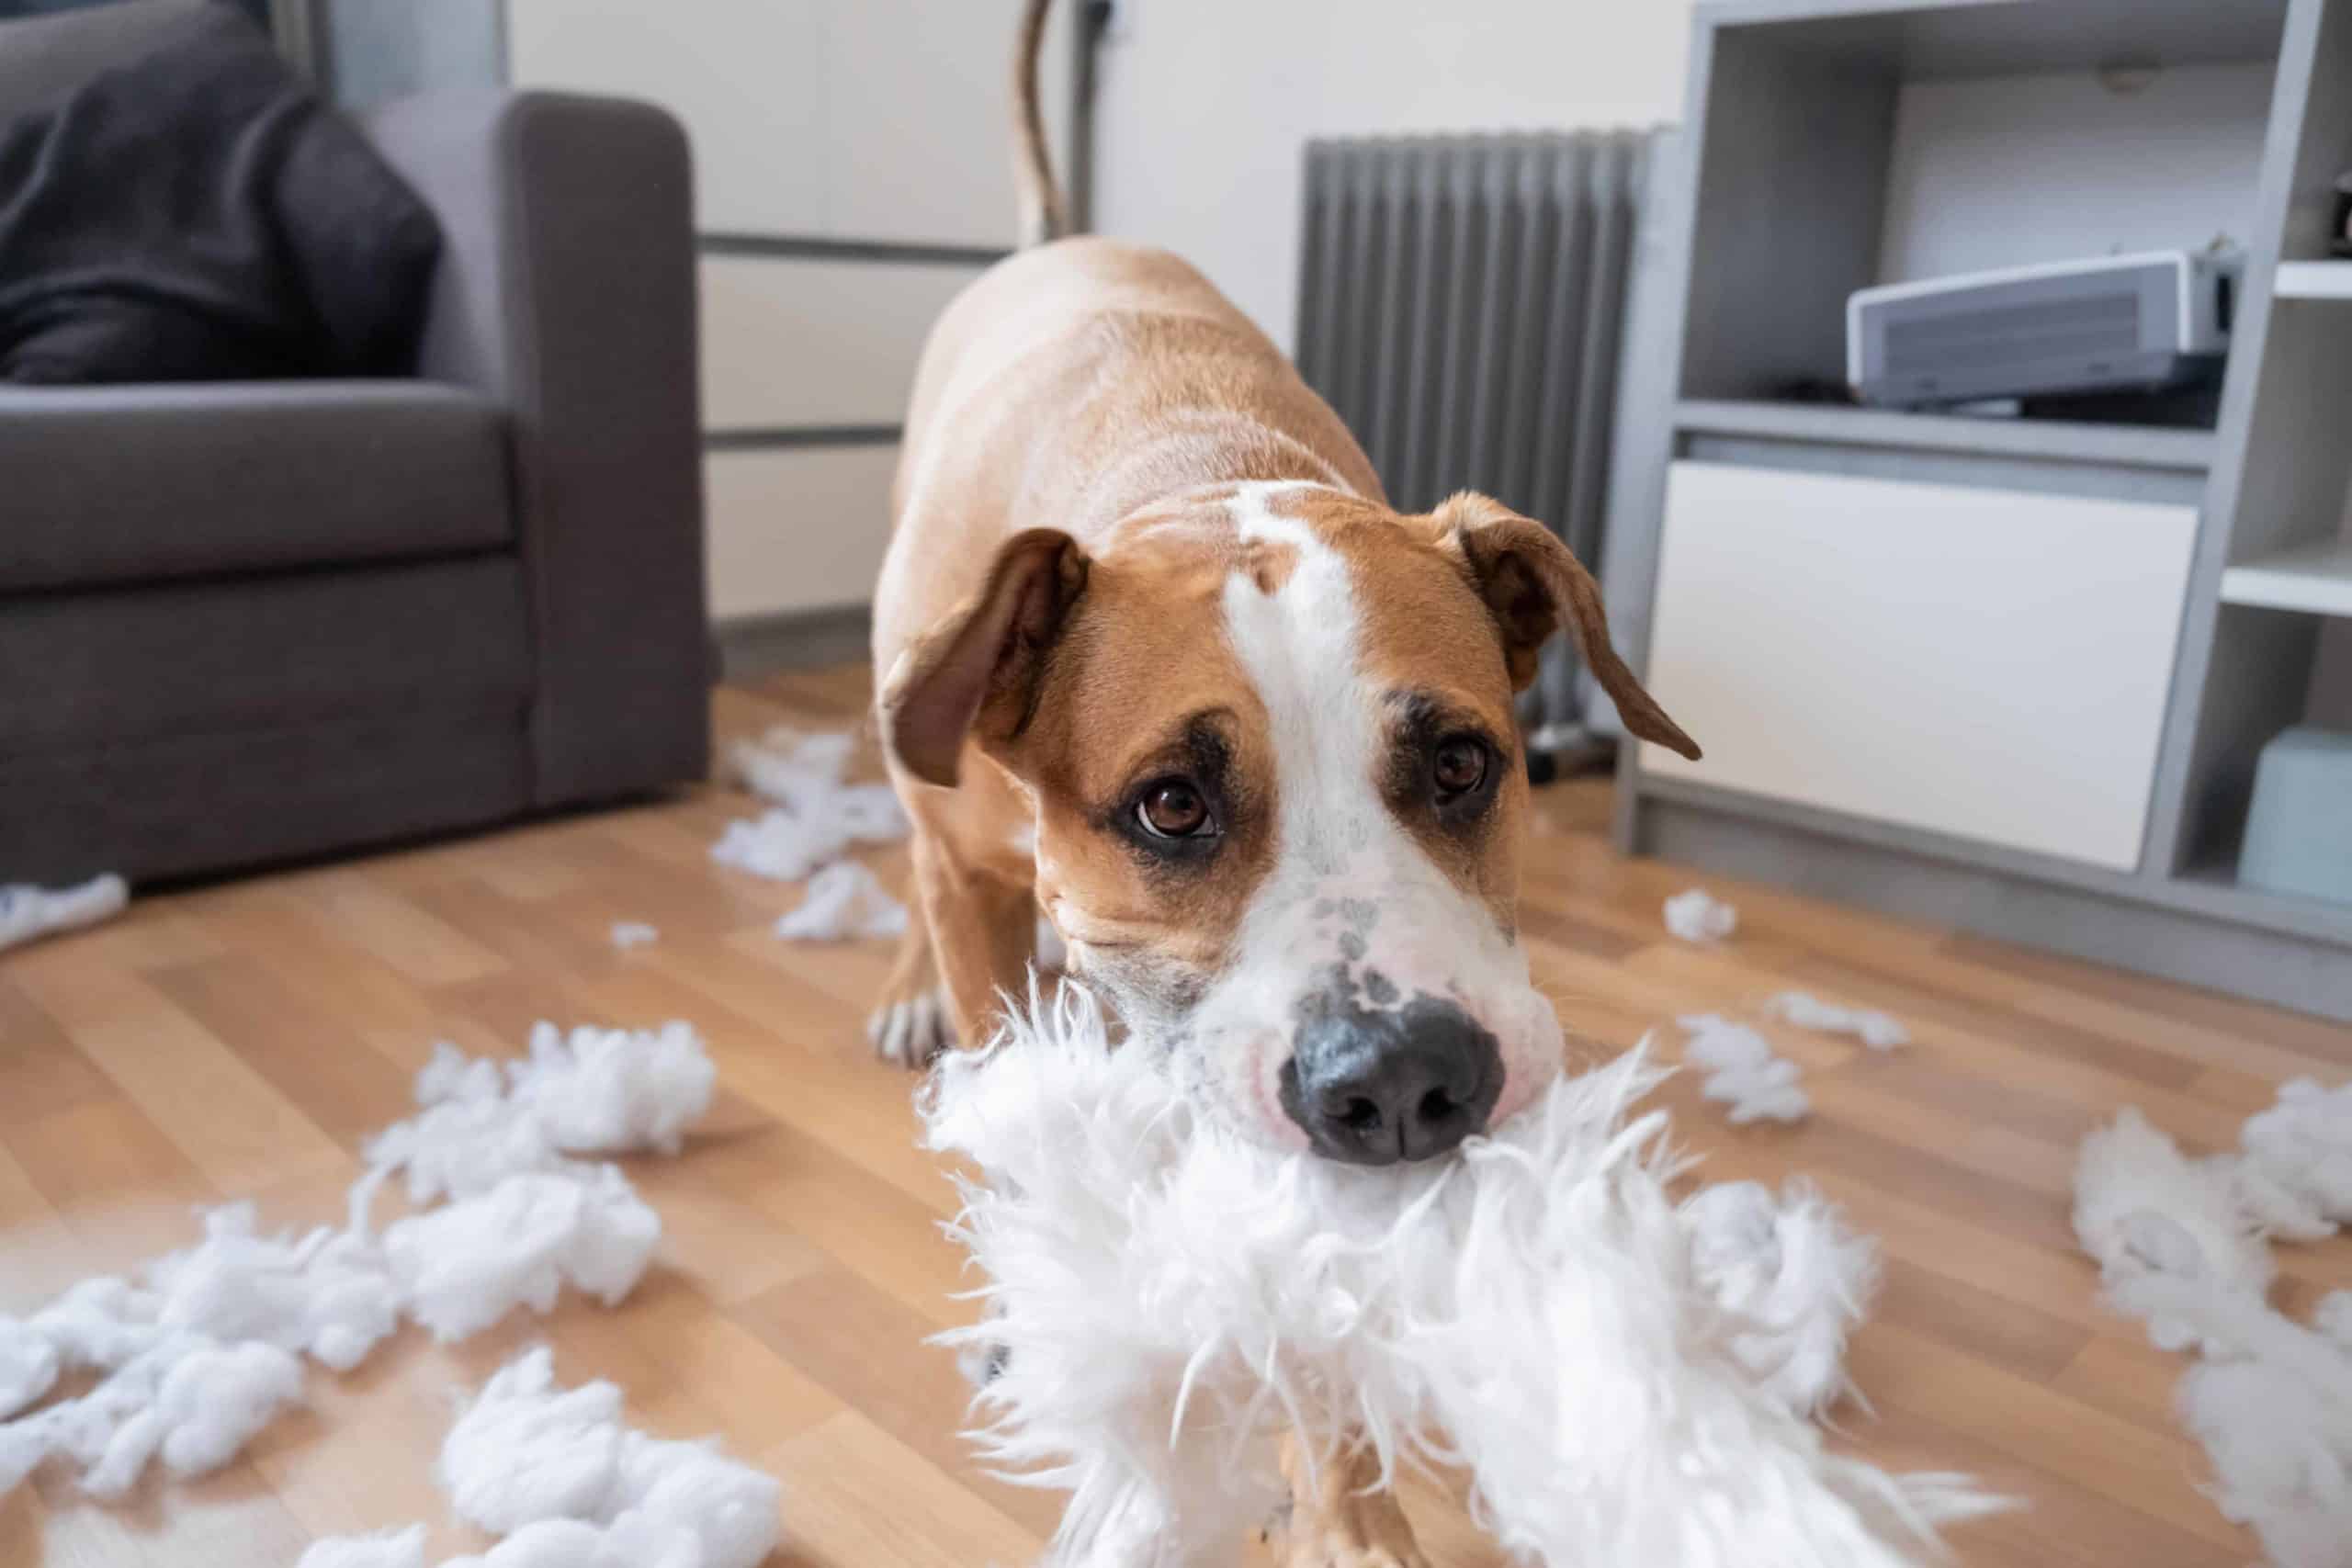 Boxer chews up furniture. Protect your dog from household dangers, including furniture, power cords, contaminants, and things your dog can chew on.